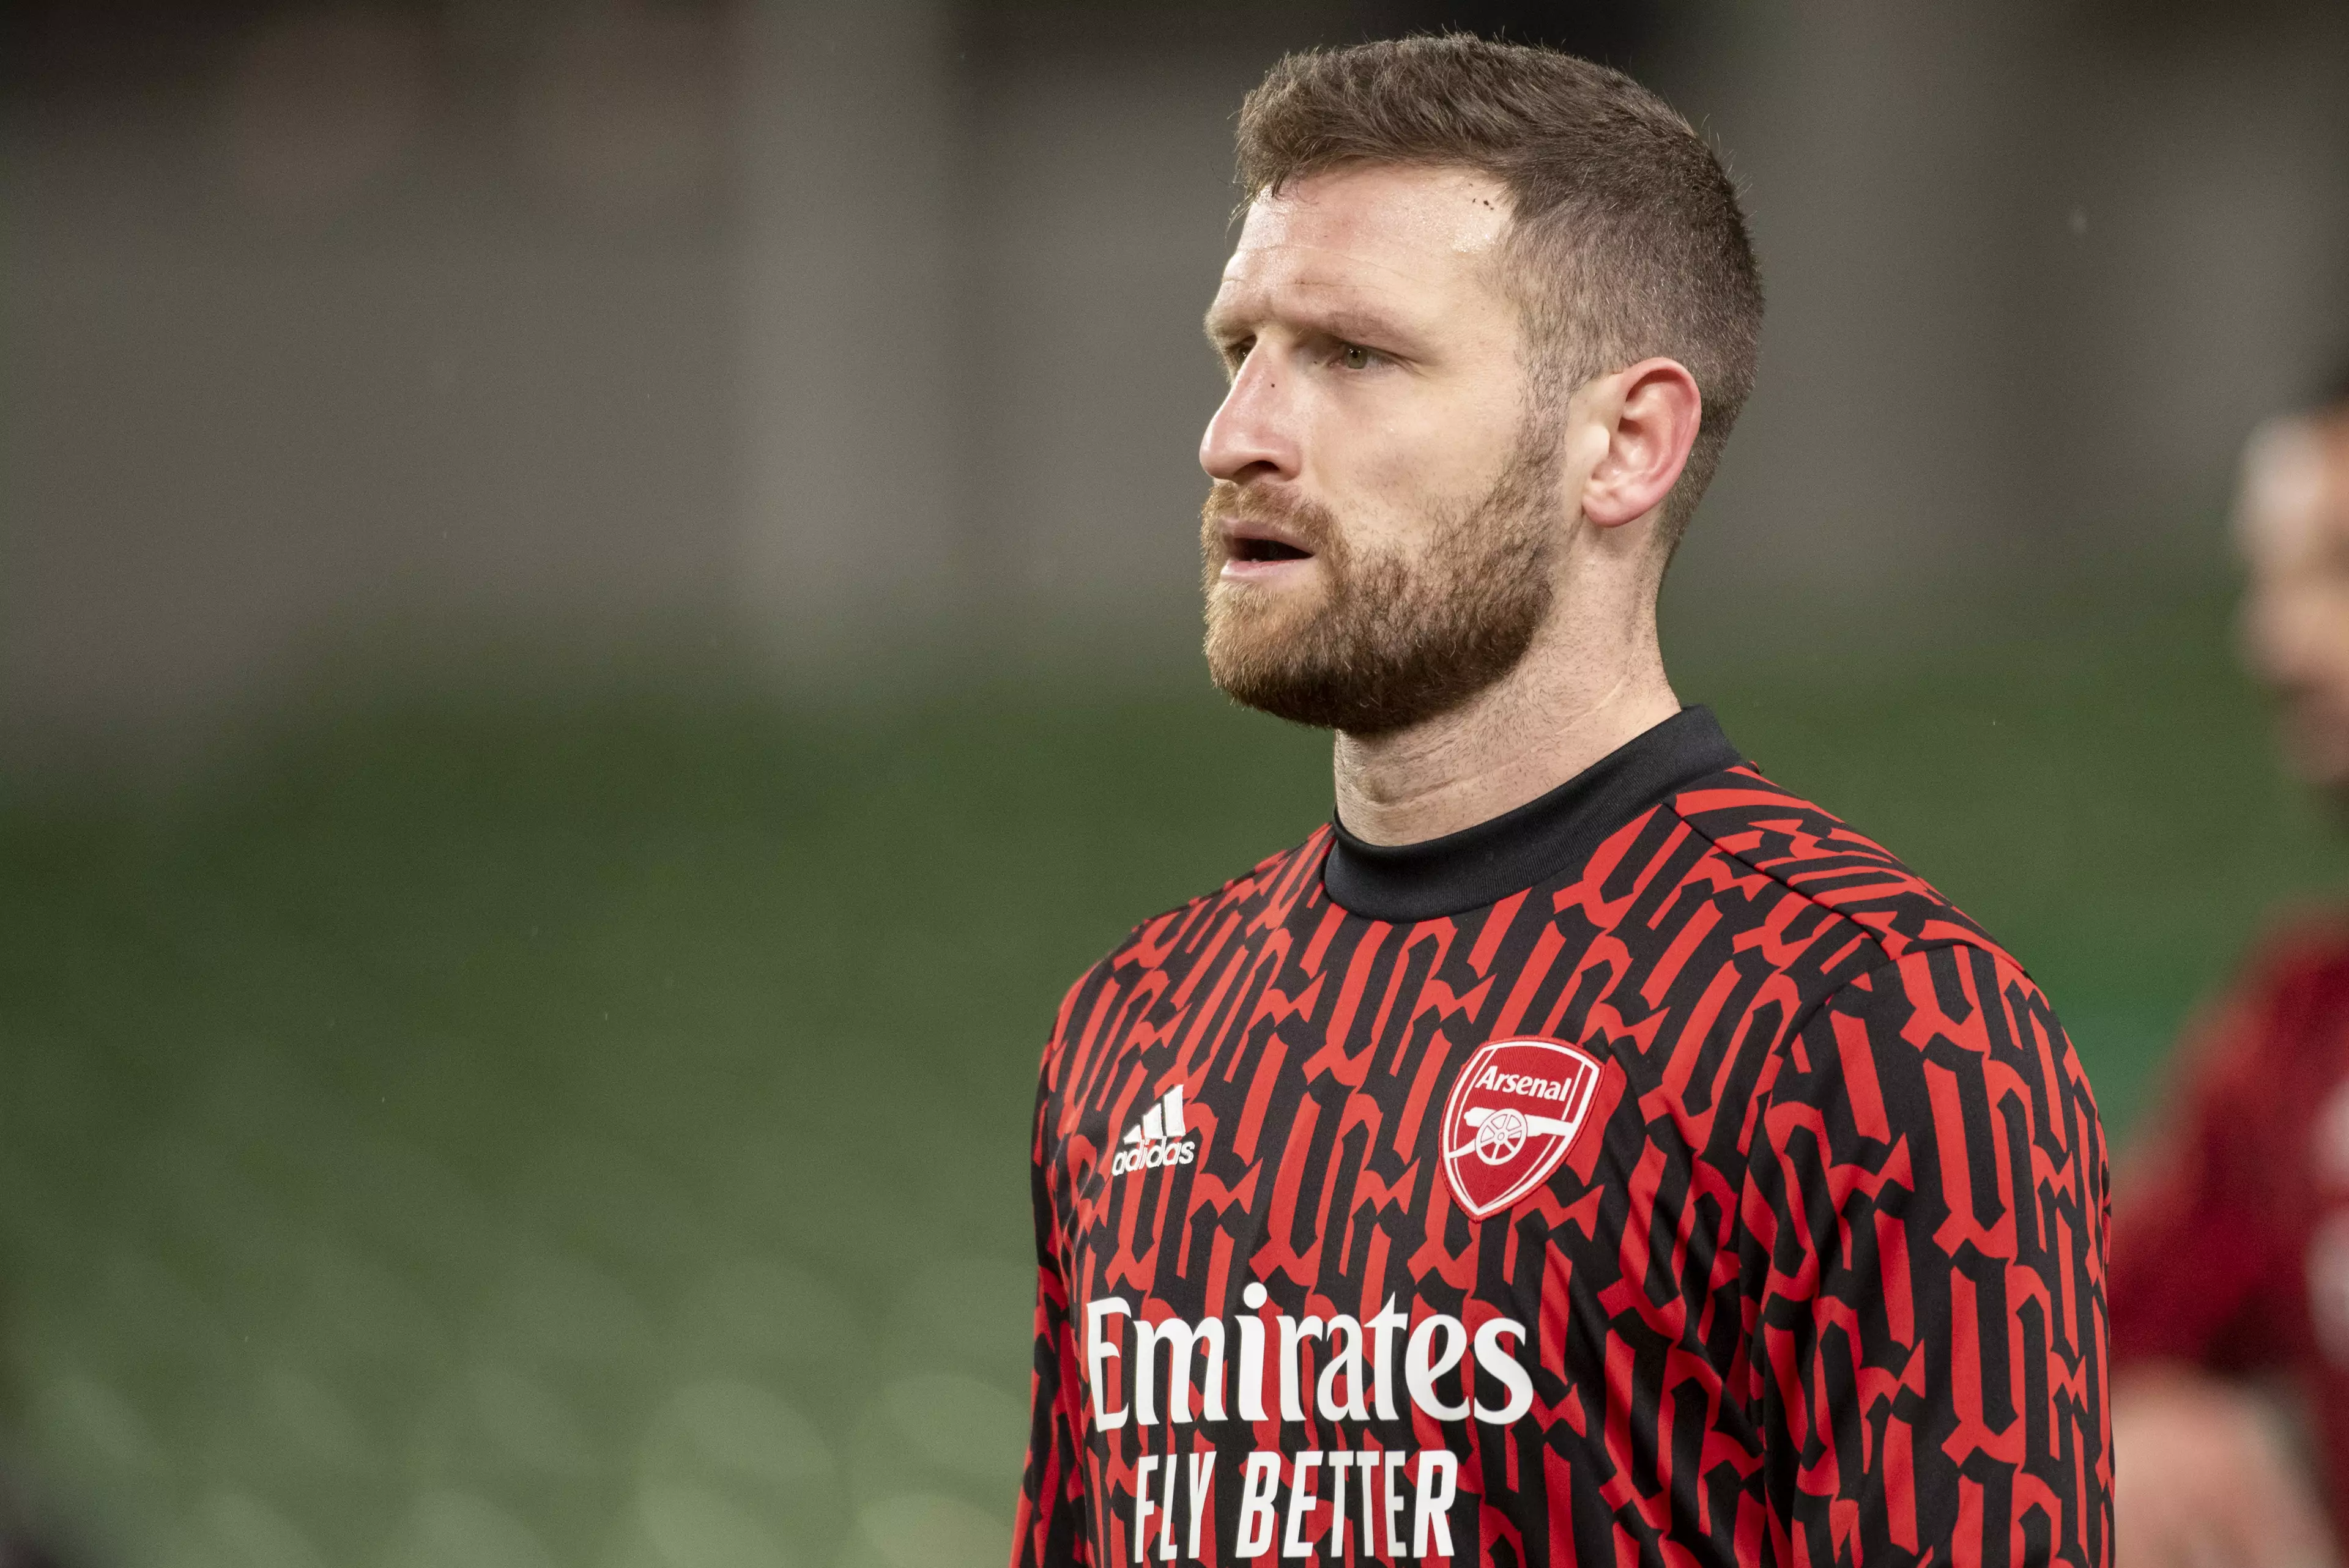 Mustafi hasn't played much this season. Image: PA Images